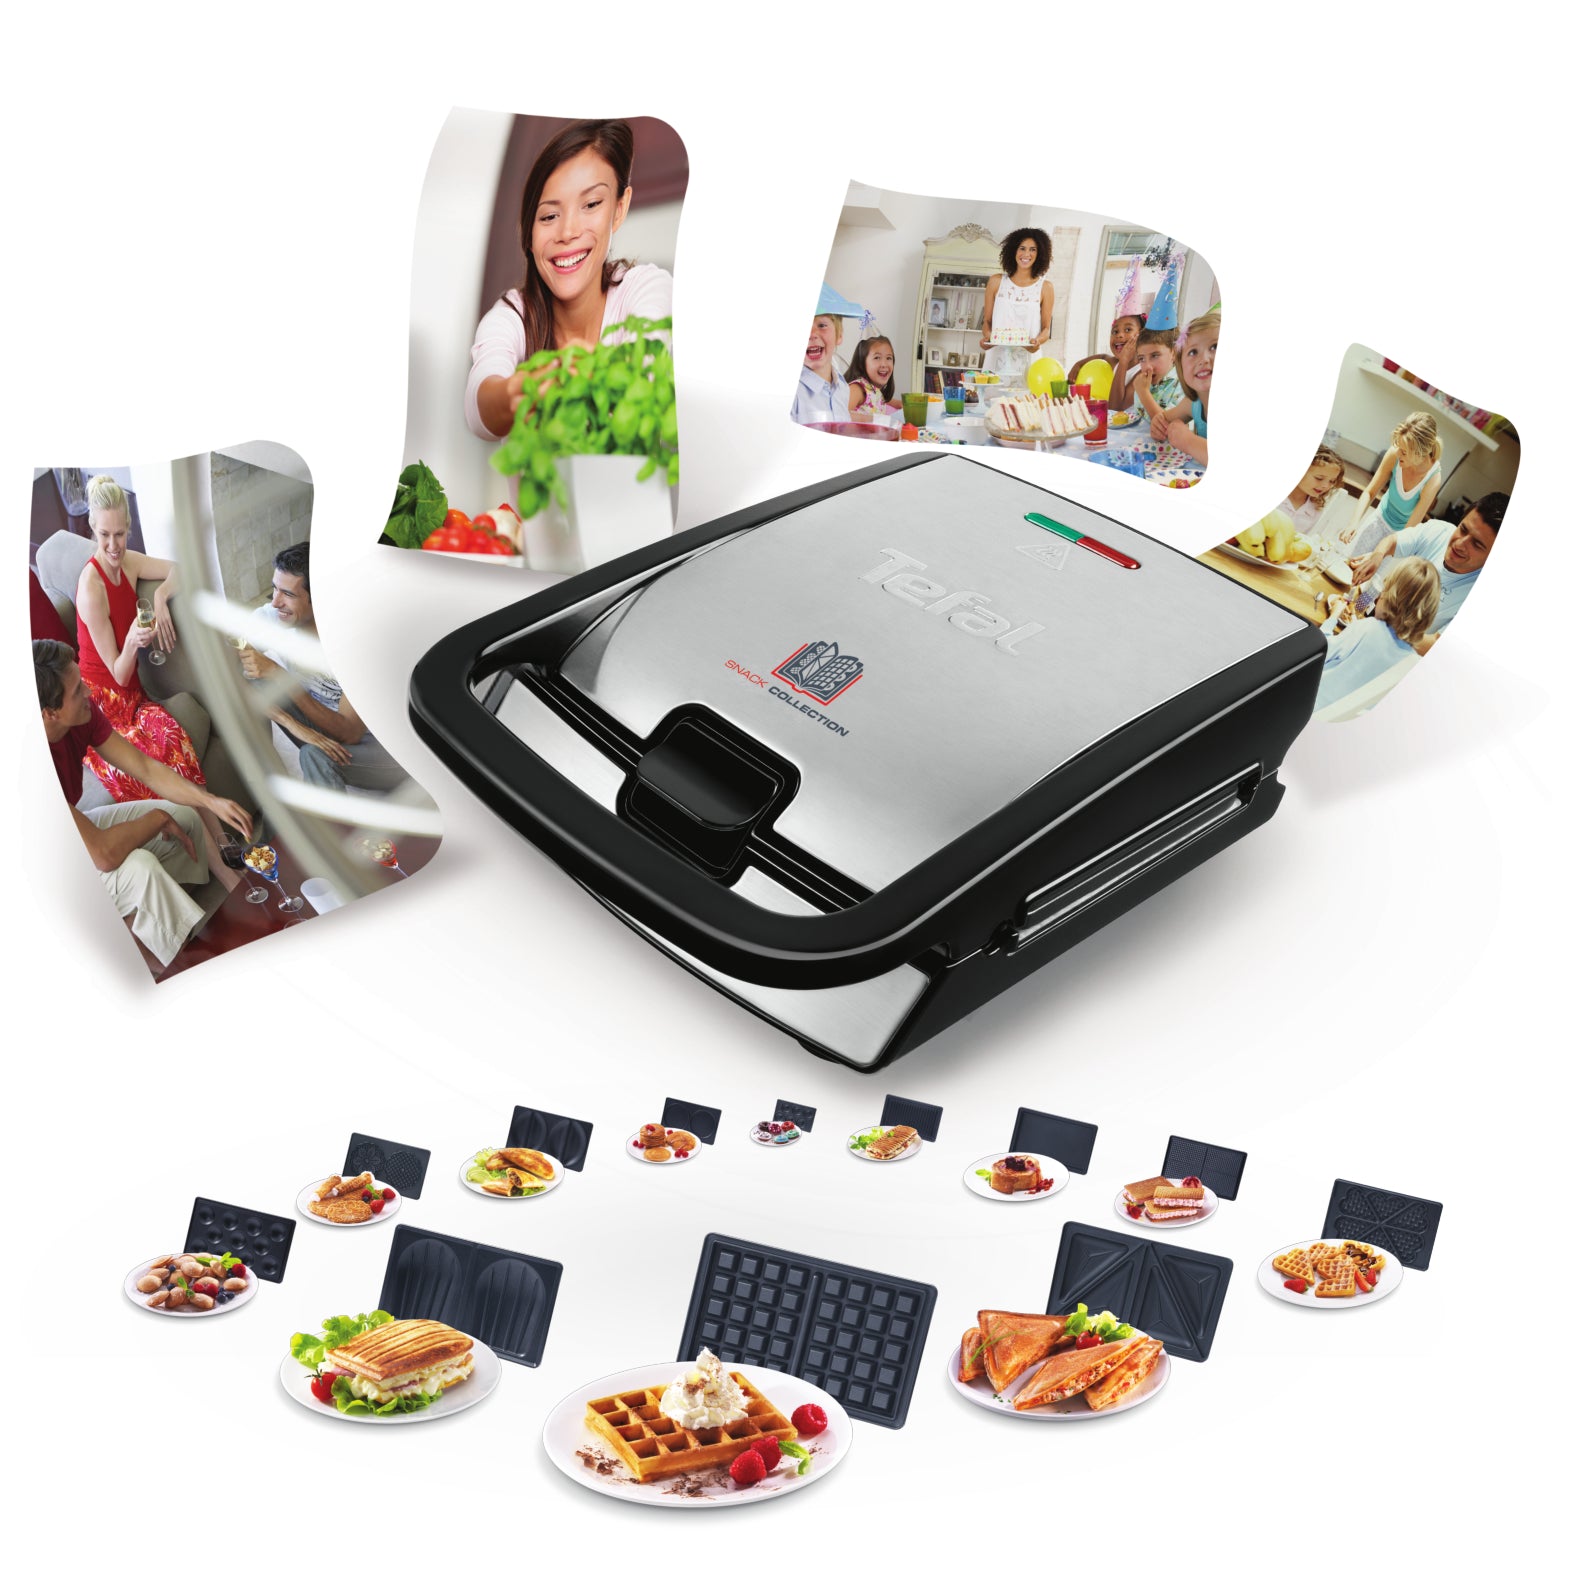 Tefal Snack Collection SW852 Sandwich and Waffle Maker